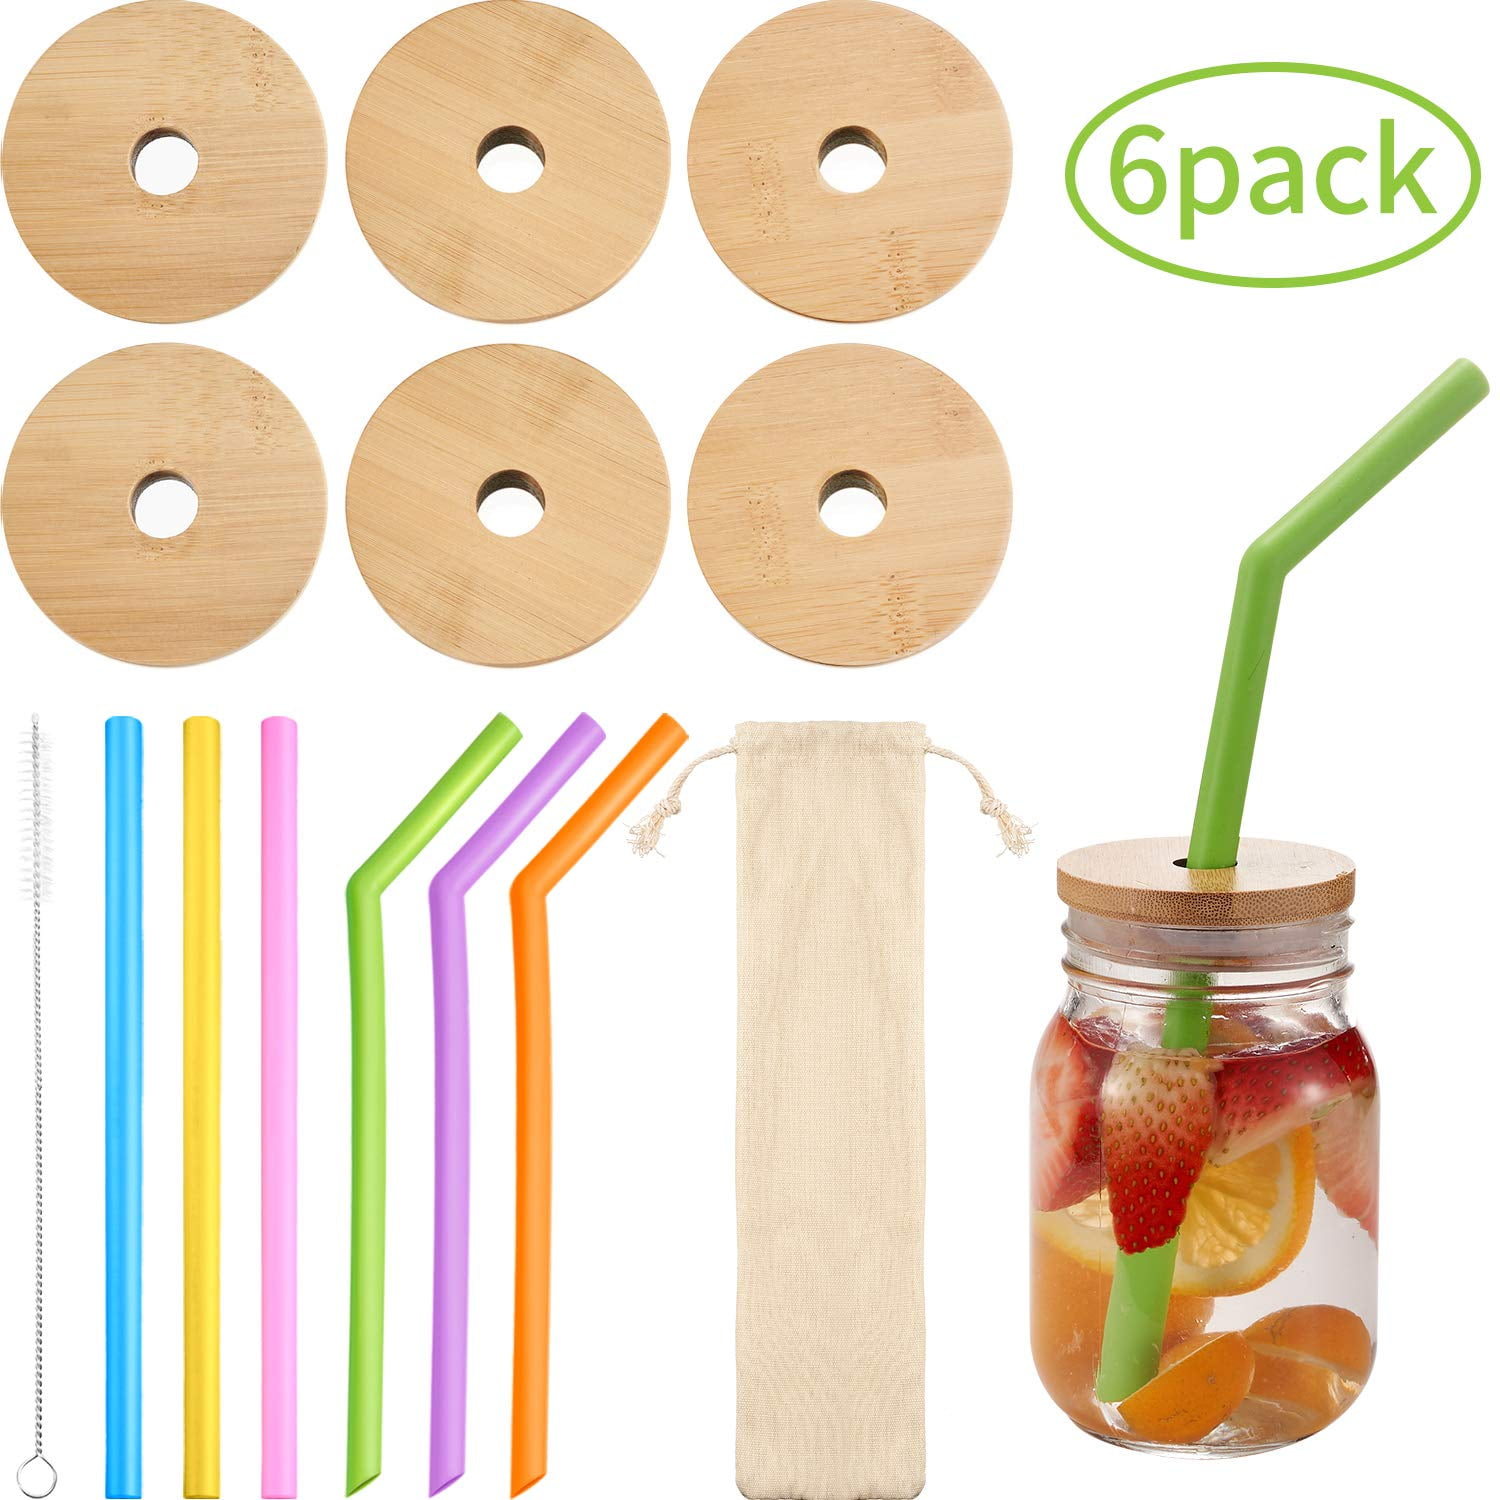 Bamboo Mason Jar Lids Regular Mouth With Straw Hole Regular mouth Natural Mason Jar Lids with 4 Reusable Stainless Steel Straws 